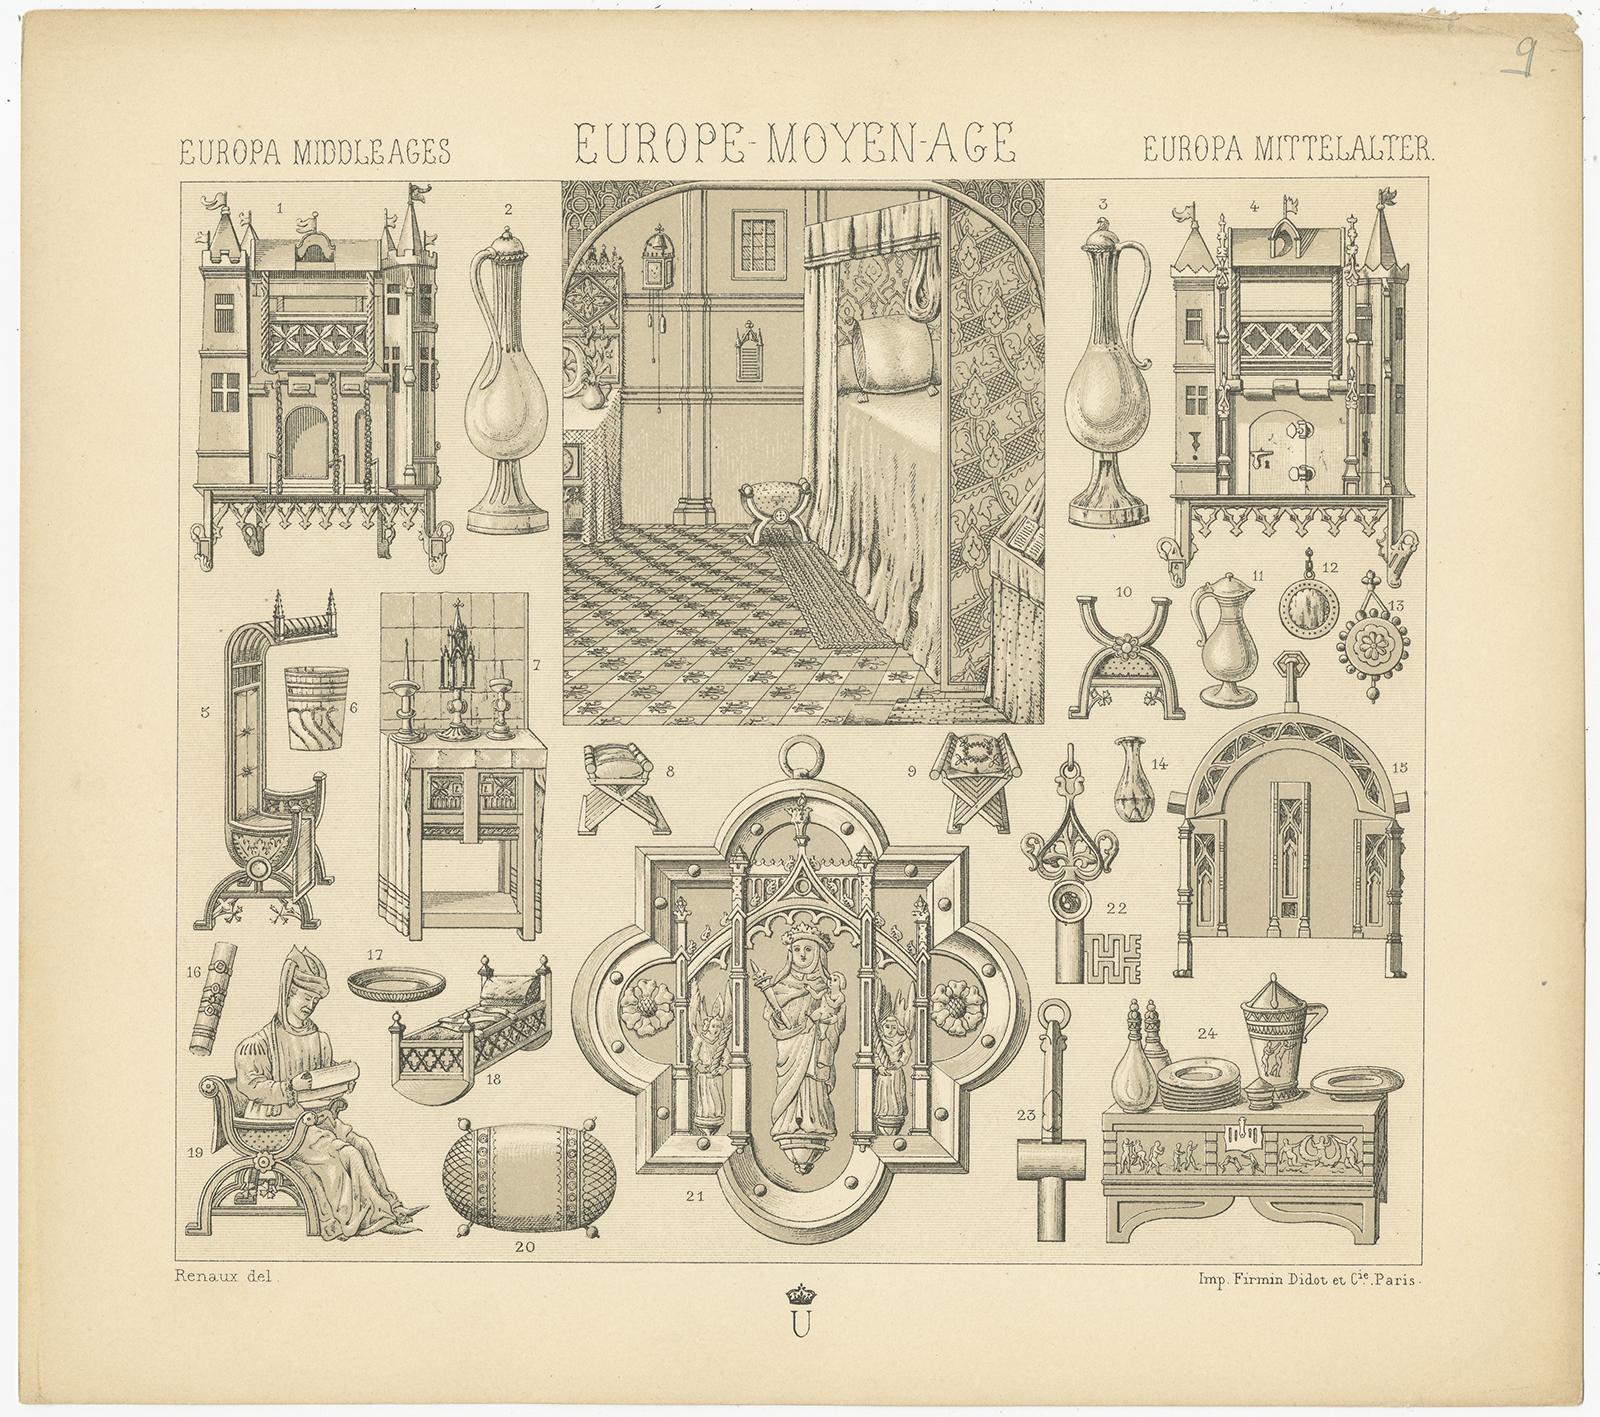 Antique print titled 'Europa Middle Ages - Europe Moyen Age - Europa Mittelalter'. Chromolithograph of European Decorative Objects. This print originates from 'Le Costume Historique' by M.A. Racinet. Published, circa 1880.